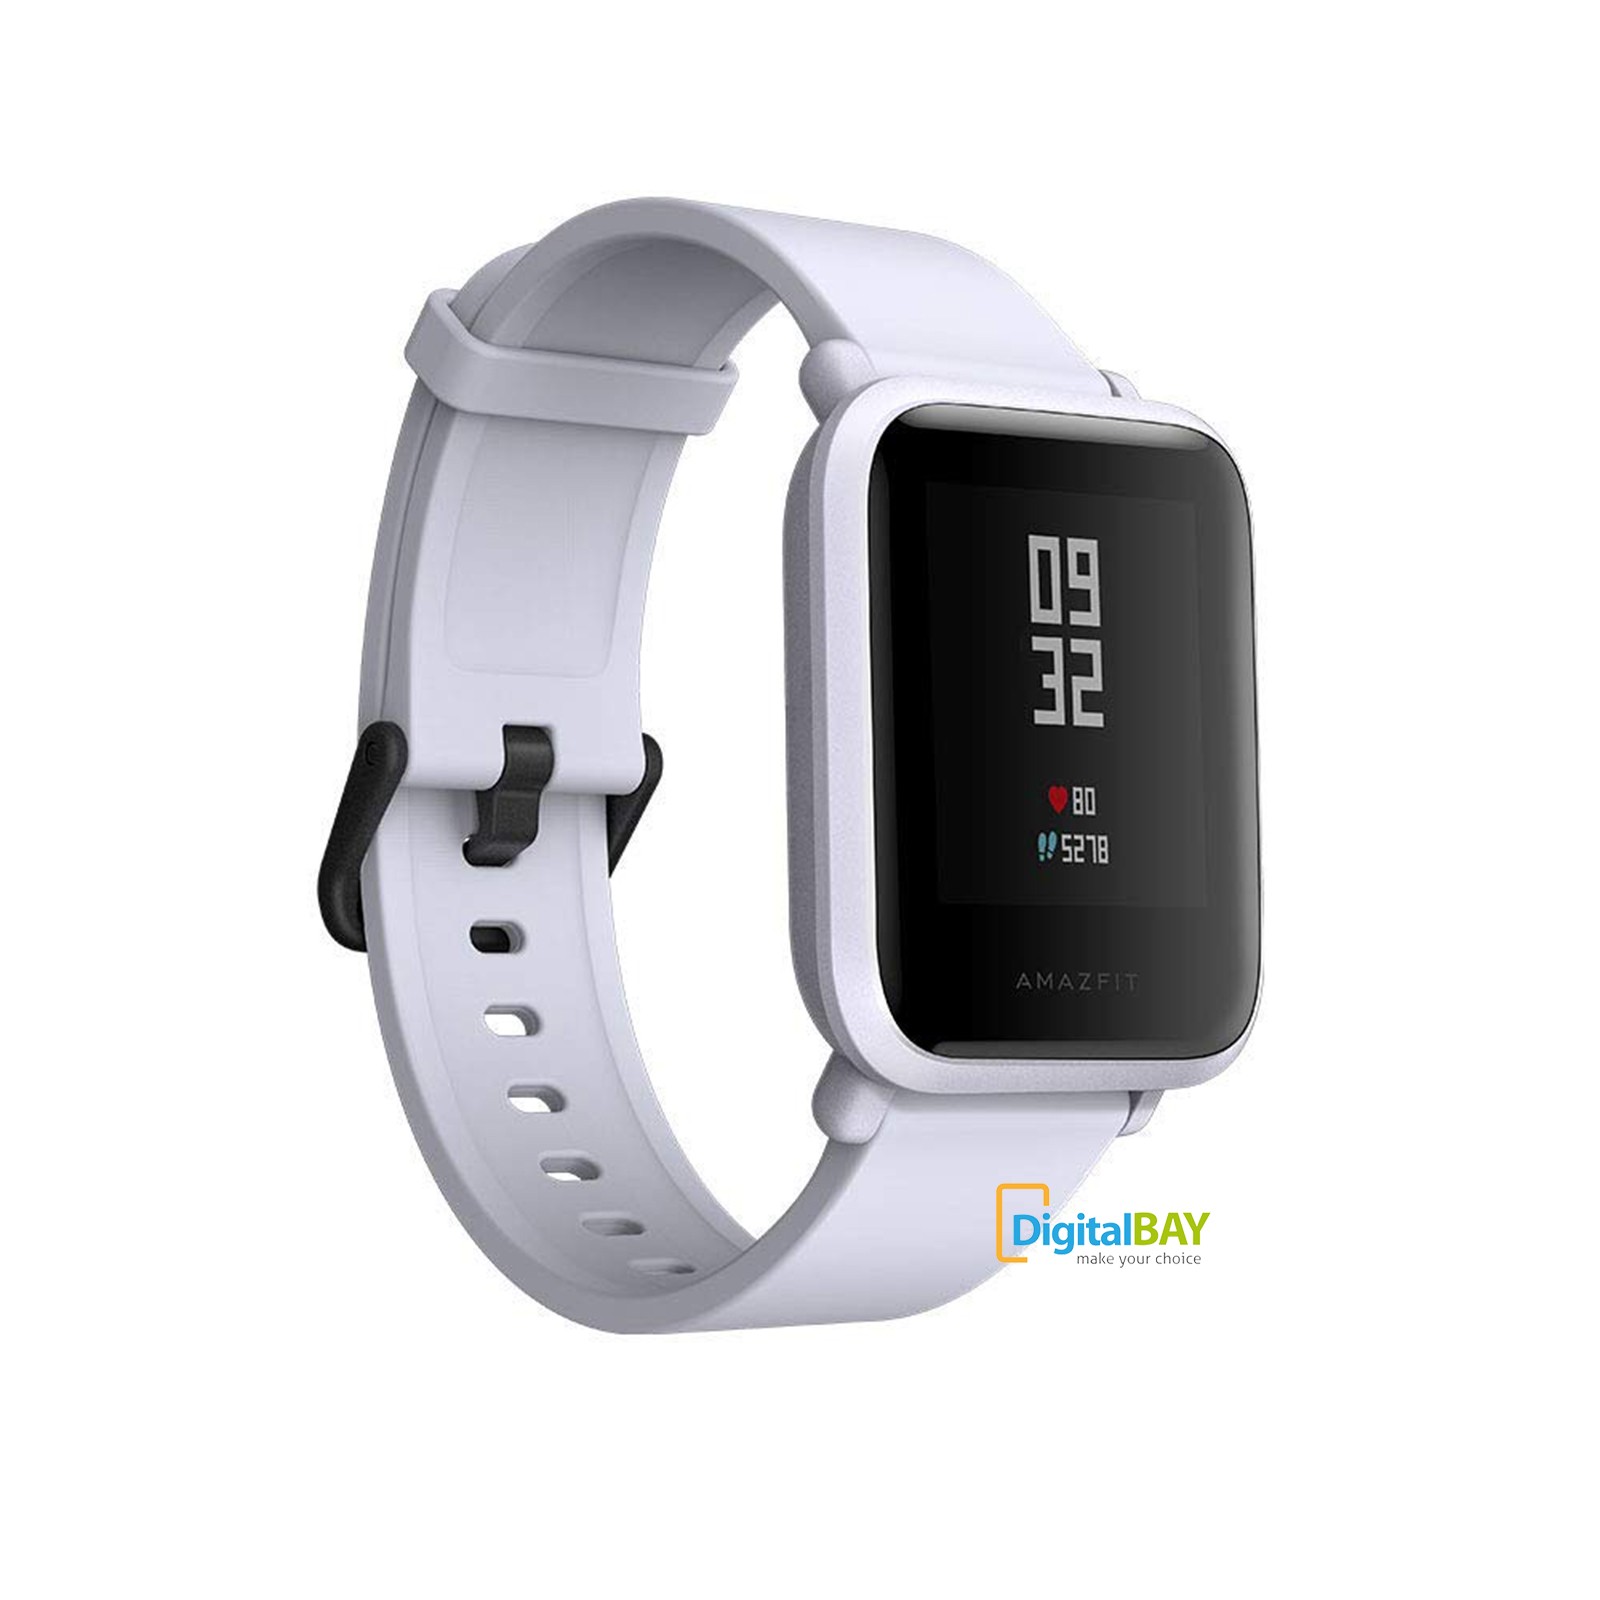 bast new style for iPhone smartwatch Q8 appel watch for